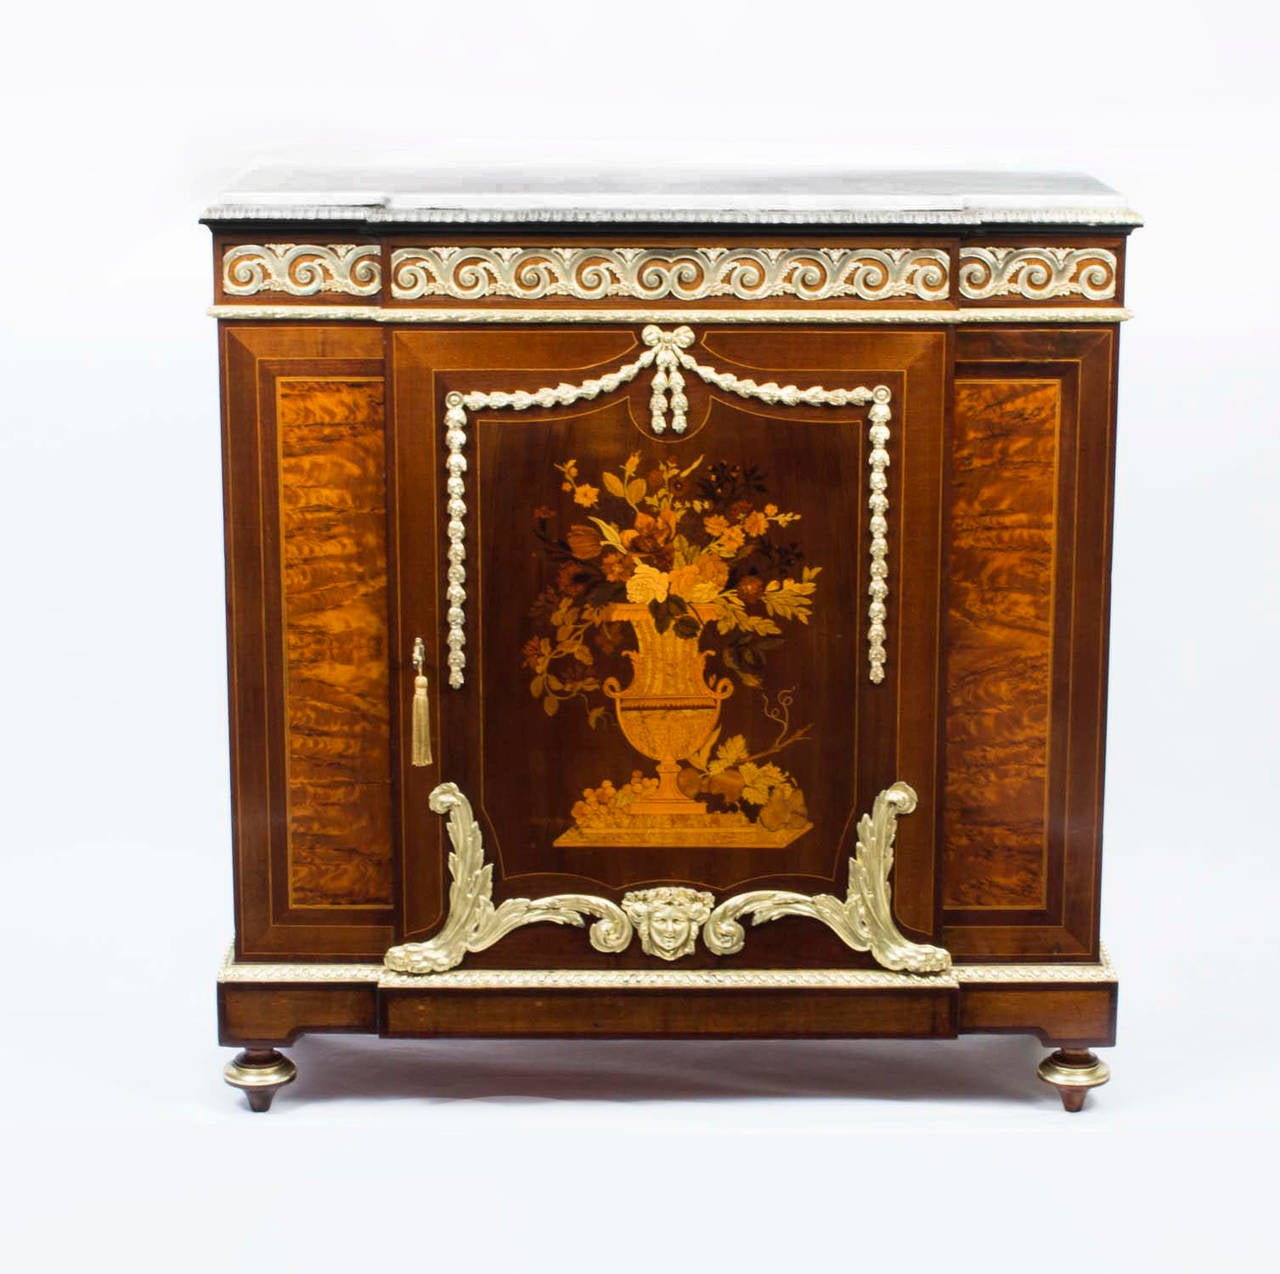 This is a beautiful 19th century French marquetry cabinet, Louis XV style, with white Carrara marble top above a frieze bearing fabulous gilded bronze ormolu mounts, the marquetry single door depicting an urn of flowers, and the cabinet standing on